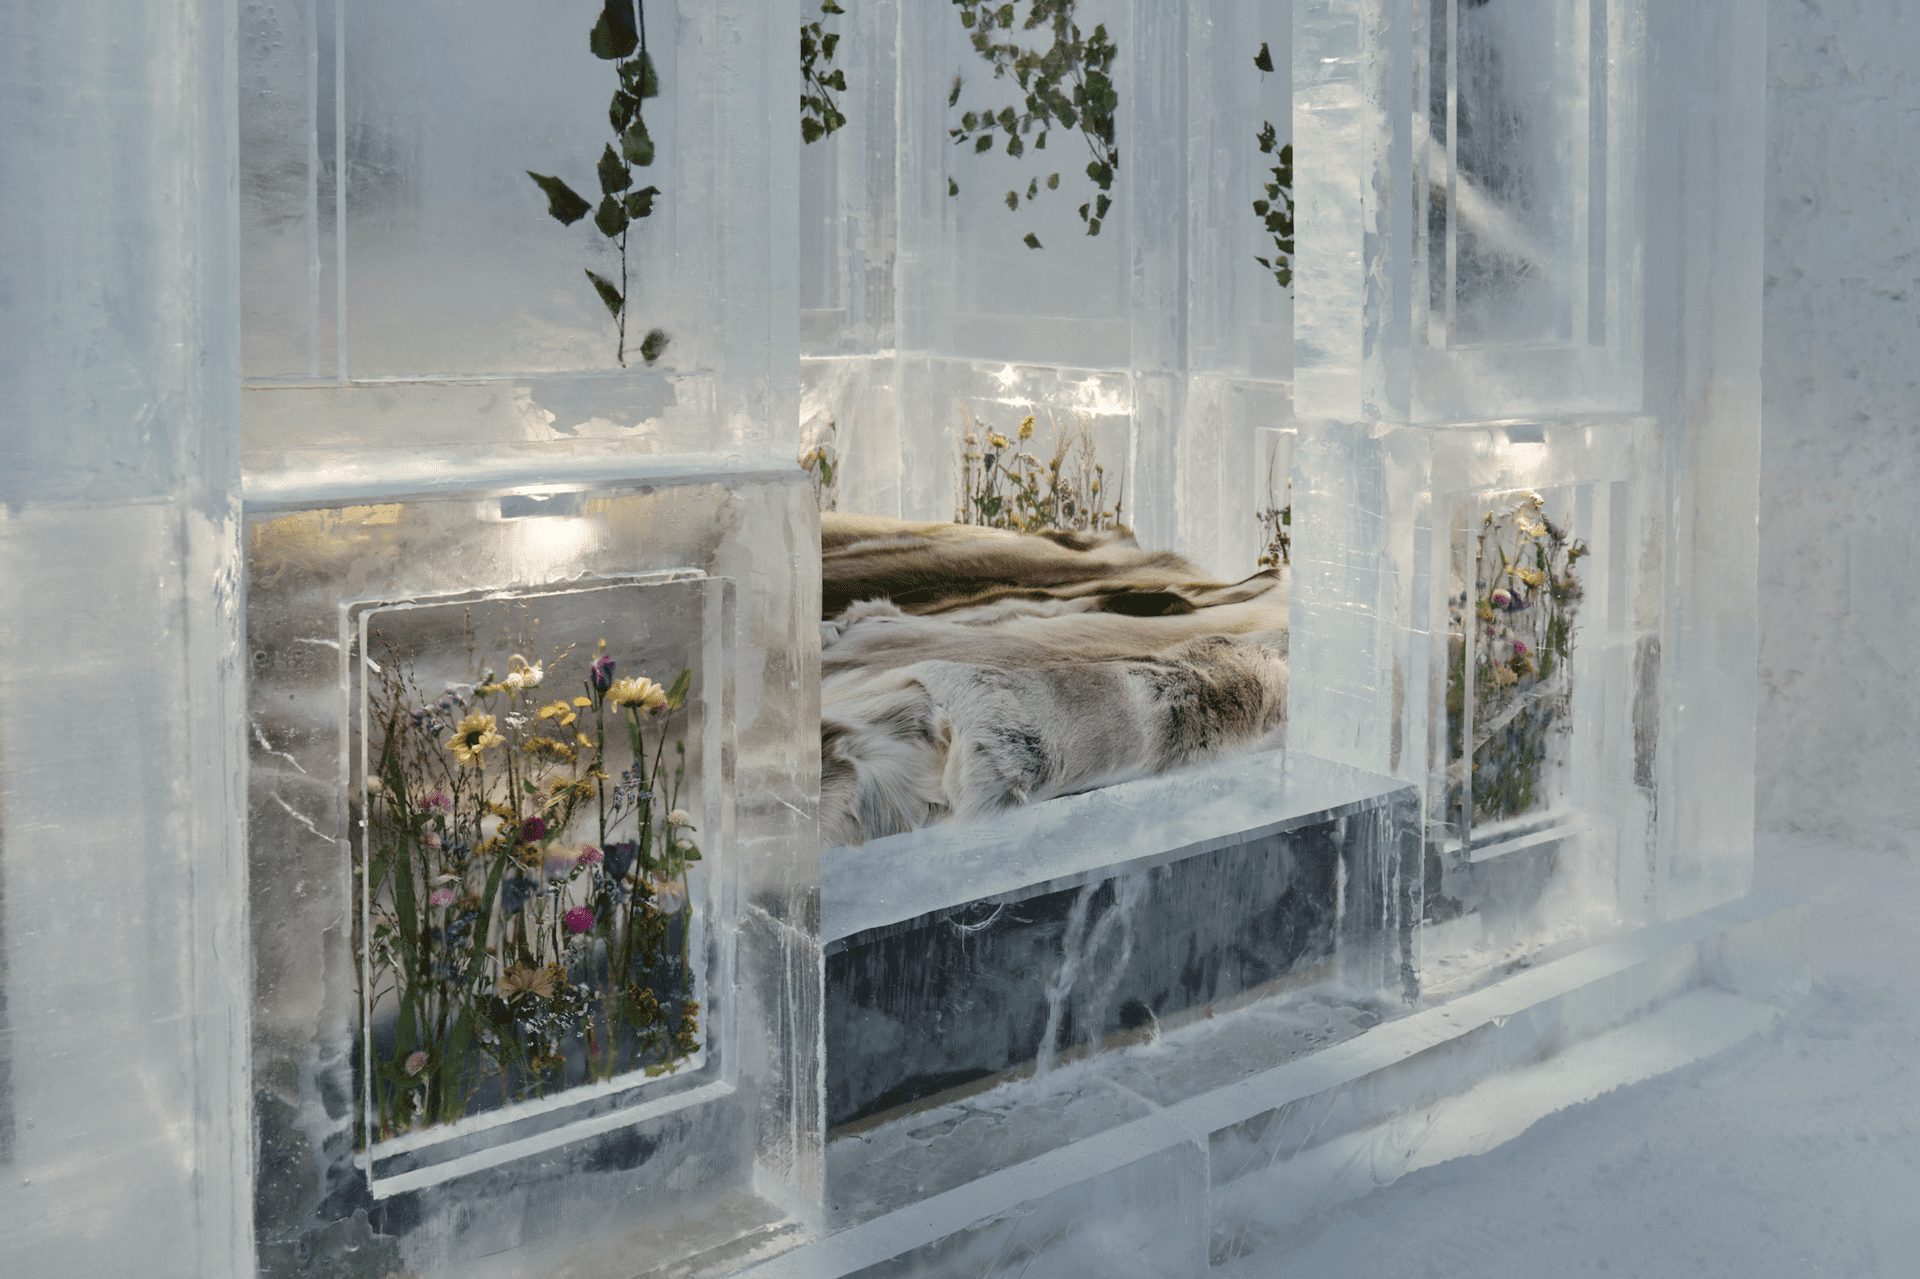 icehotel, sweden, Bernadotte and Oscar Kylberg, hospitality, design, interiors, ice architecture, icehotel 365, OnOffice magazine